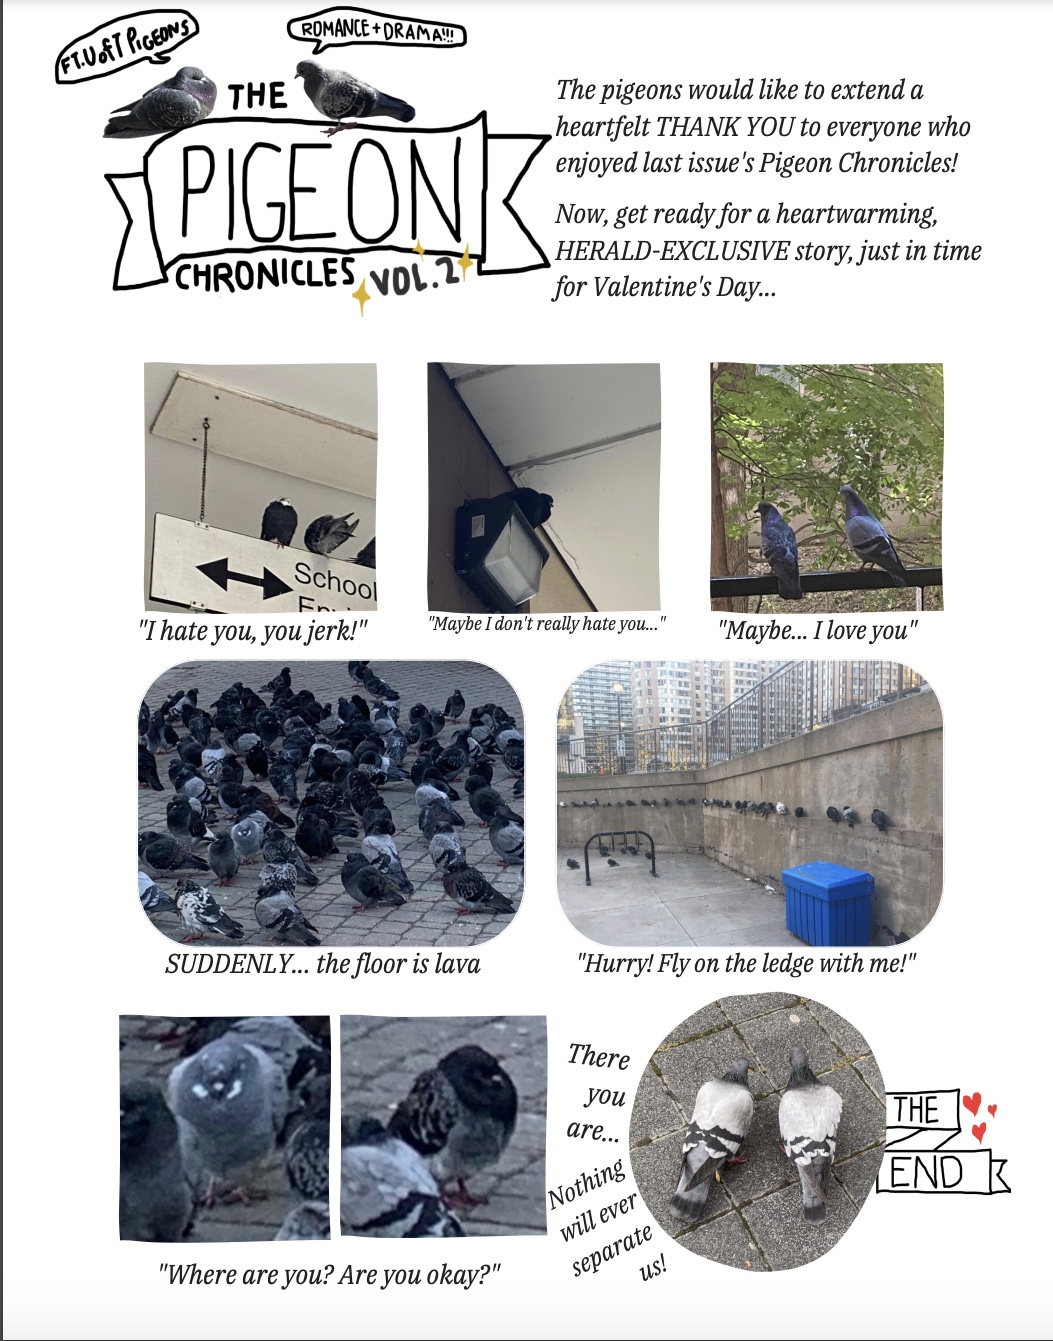 The Pigeon Chronicles Vol.2